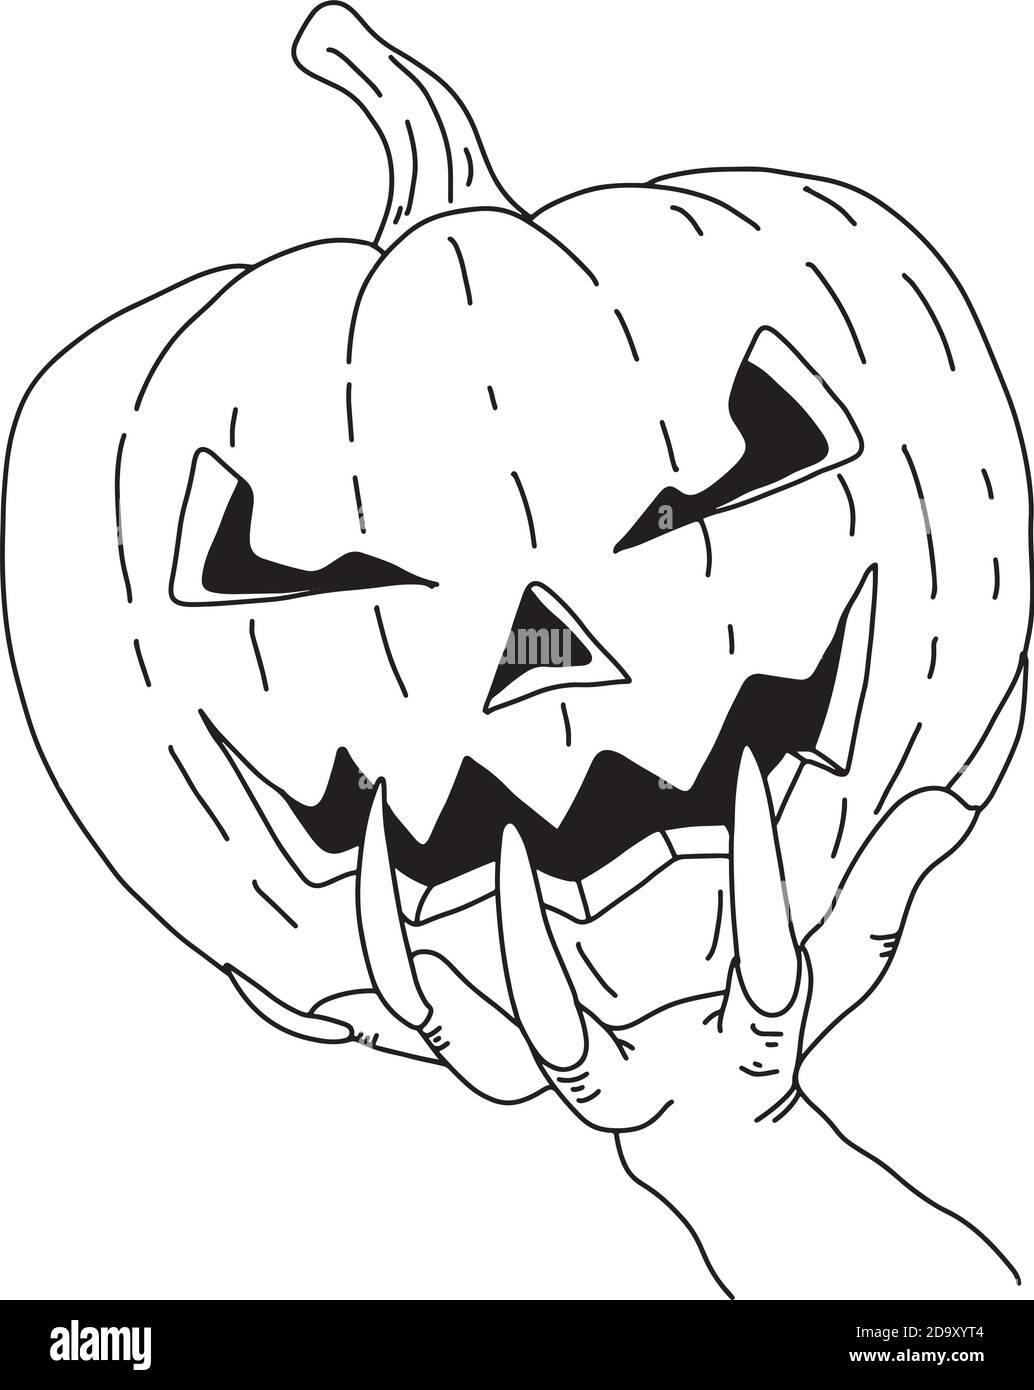 hand with long nails holding Hallowen pumpkin vector illustration sketch doodle hand drawn with black lines isolated on white background Stock Vector